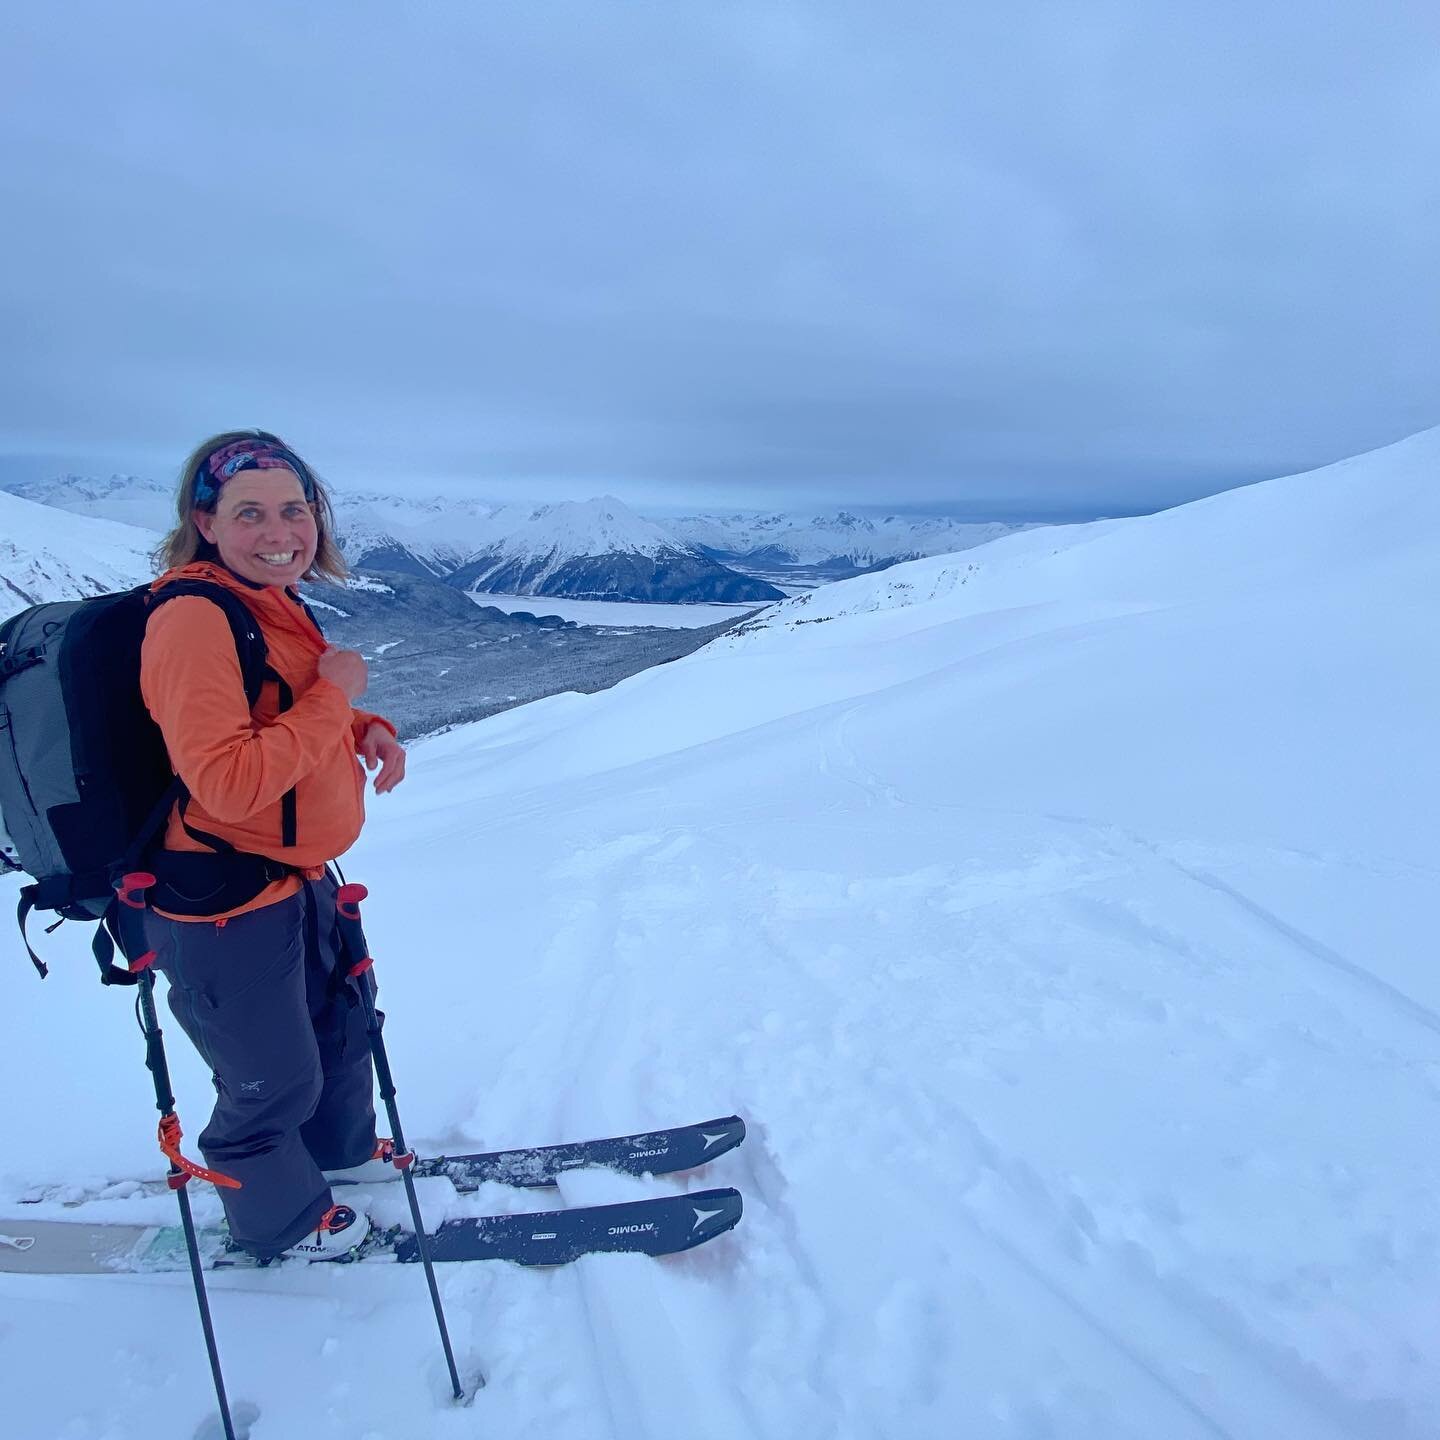 Episode 6.9 is 🆙 featuring @elatosuo.  Eeva is an Associate Professor of Outdoor Studies at Alaska Pacific University where she gets to explore avalanche science with undergraduate students as well as engage in personal research projects. Eeva is al